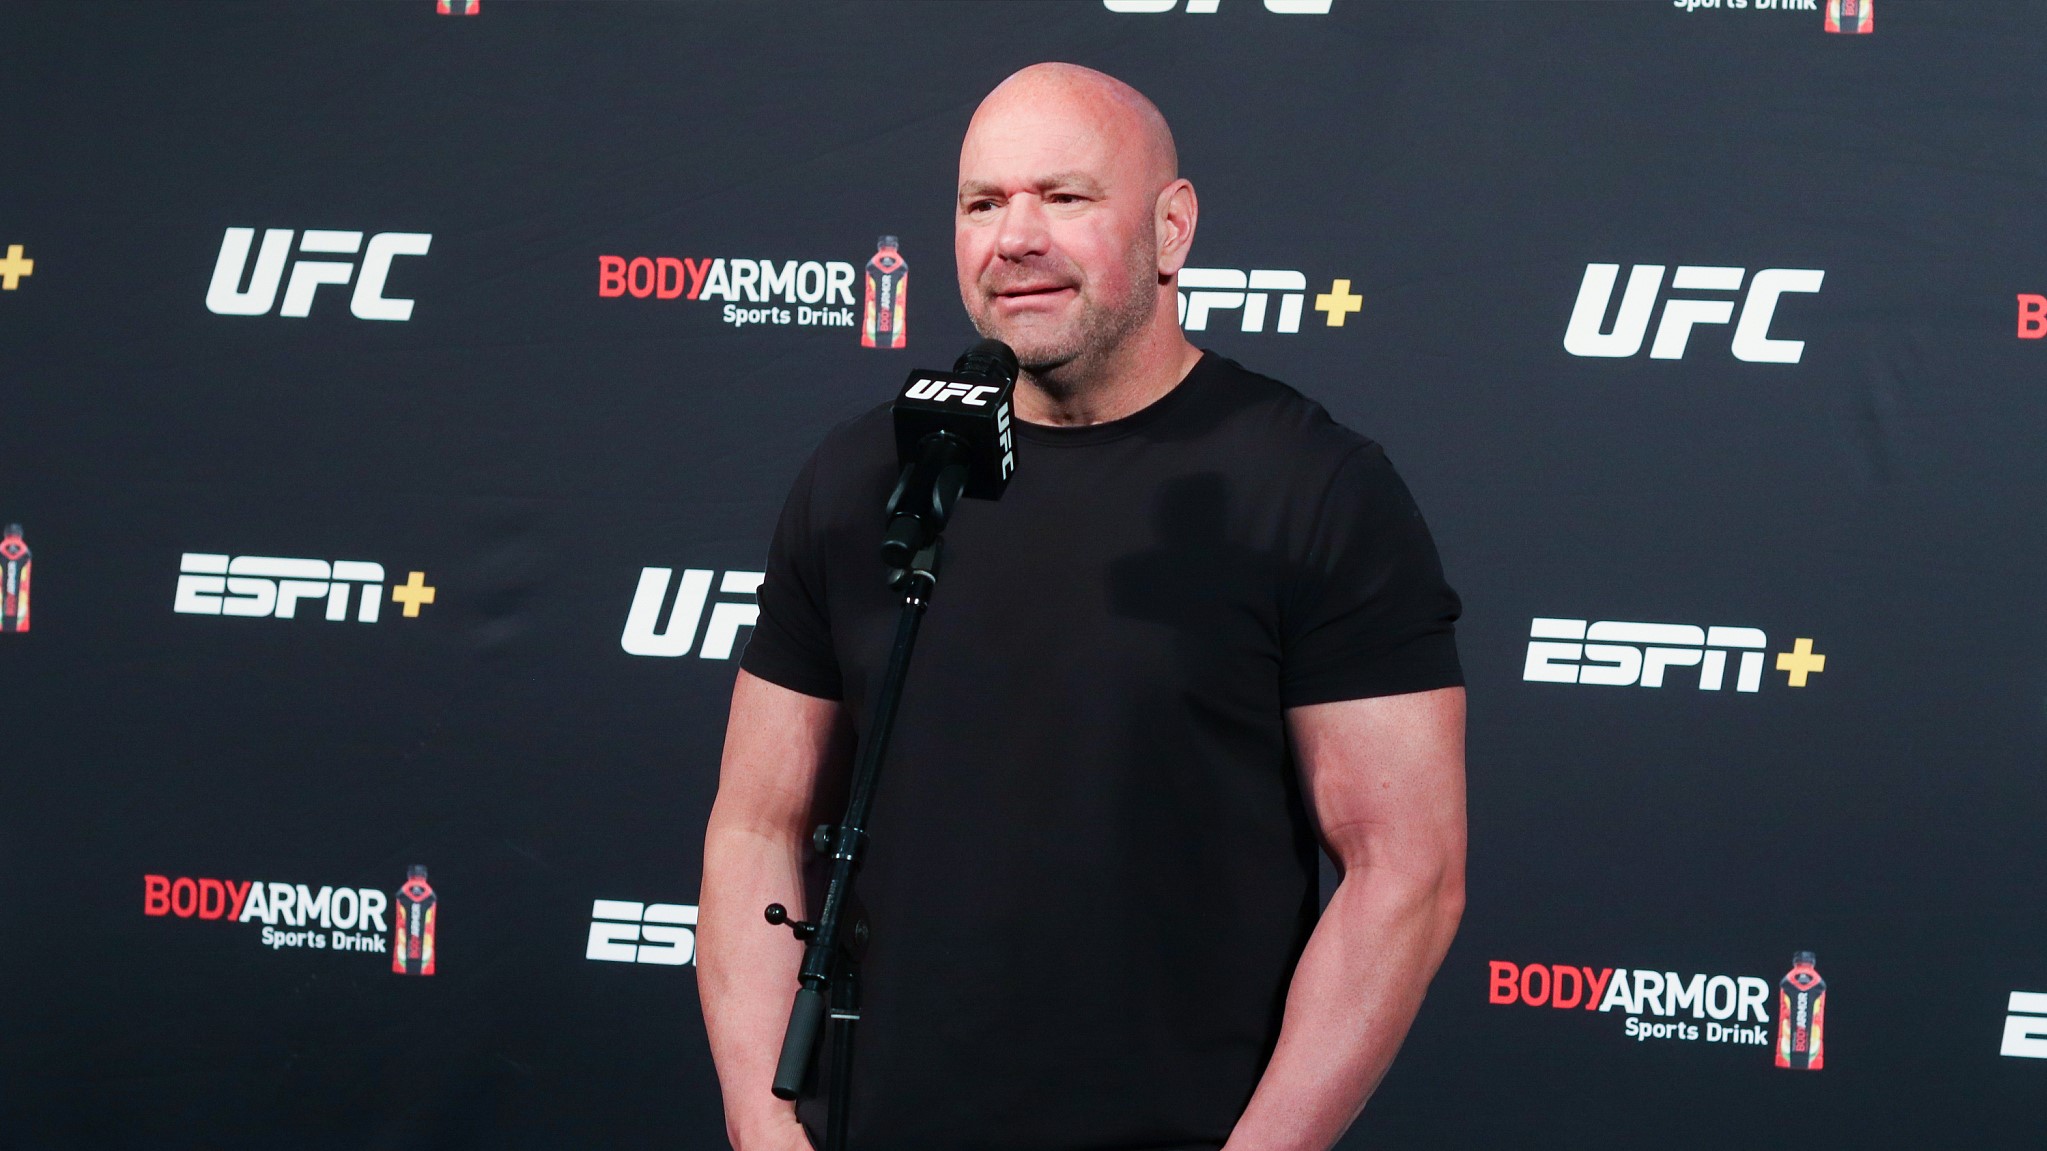 Dana White: UFC will probably cut 60 fighters before 2020 ends - CGTN